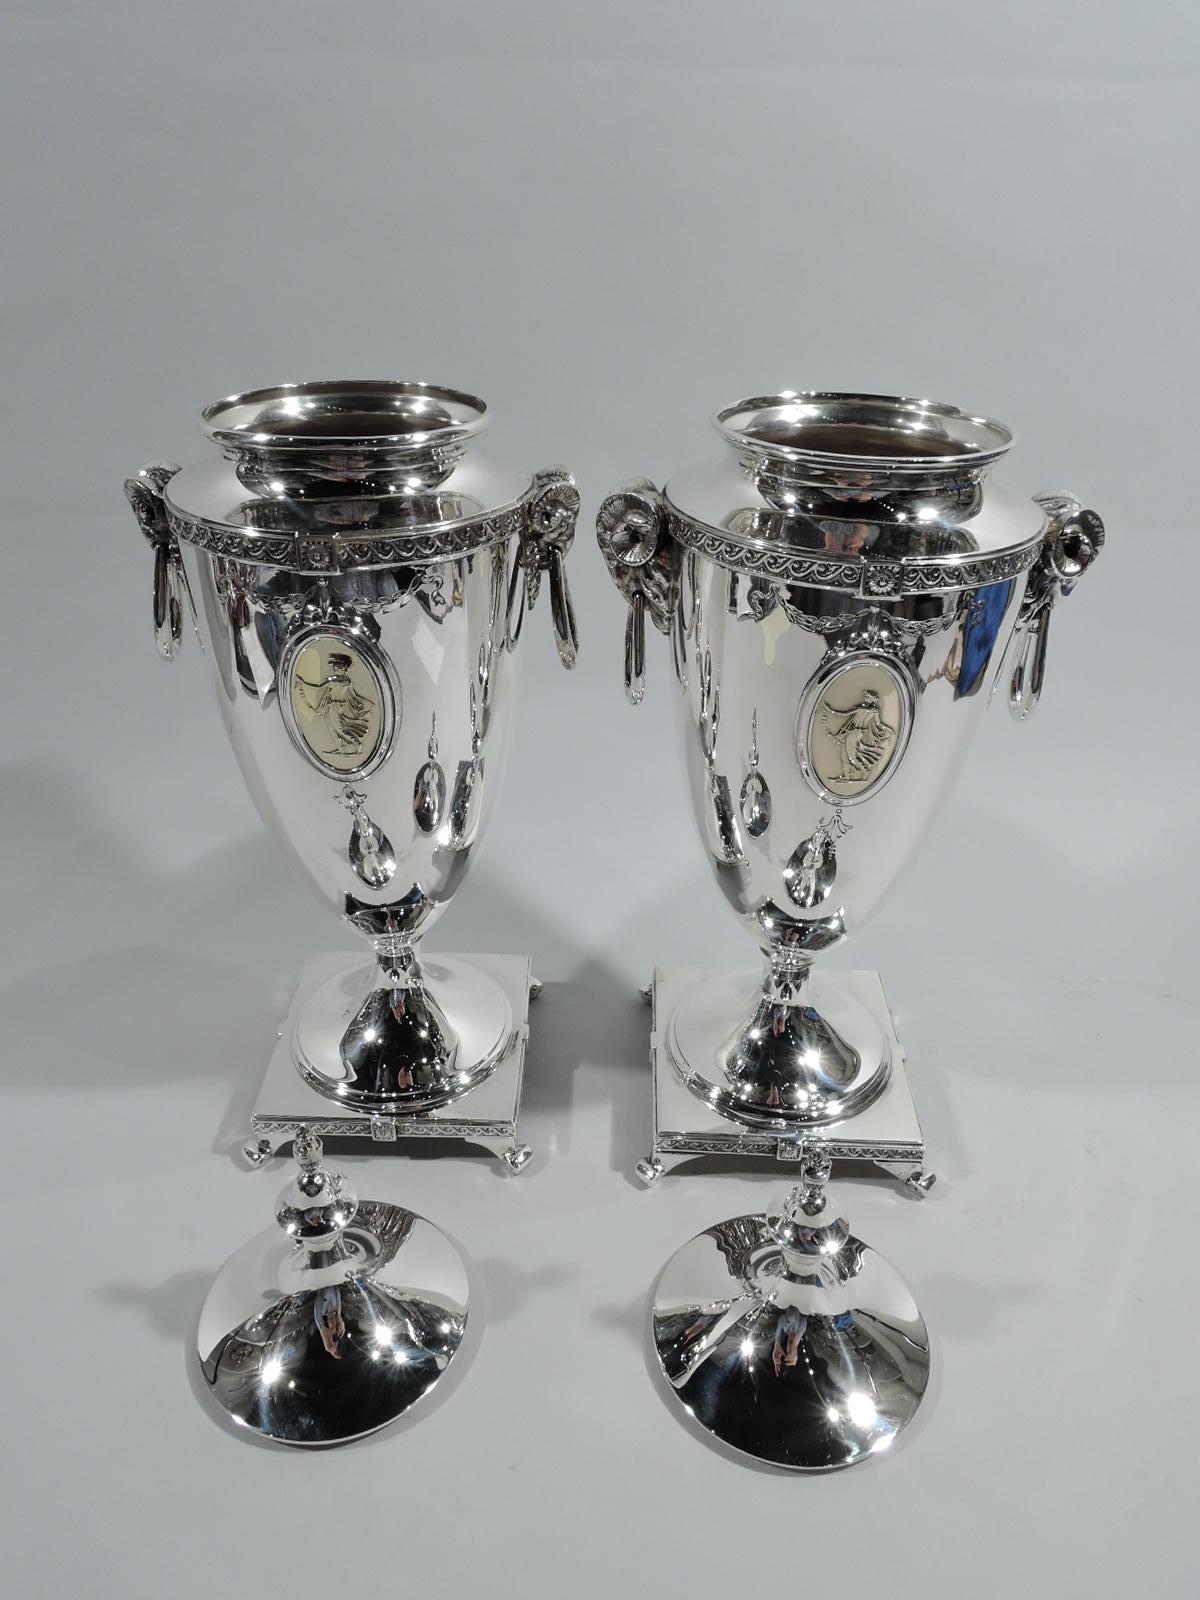 Neoclassical Revival Pair of Antique Mt Vernon Pompeiian American Sterling Silver Urns